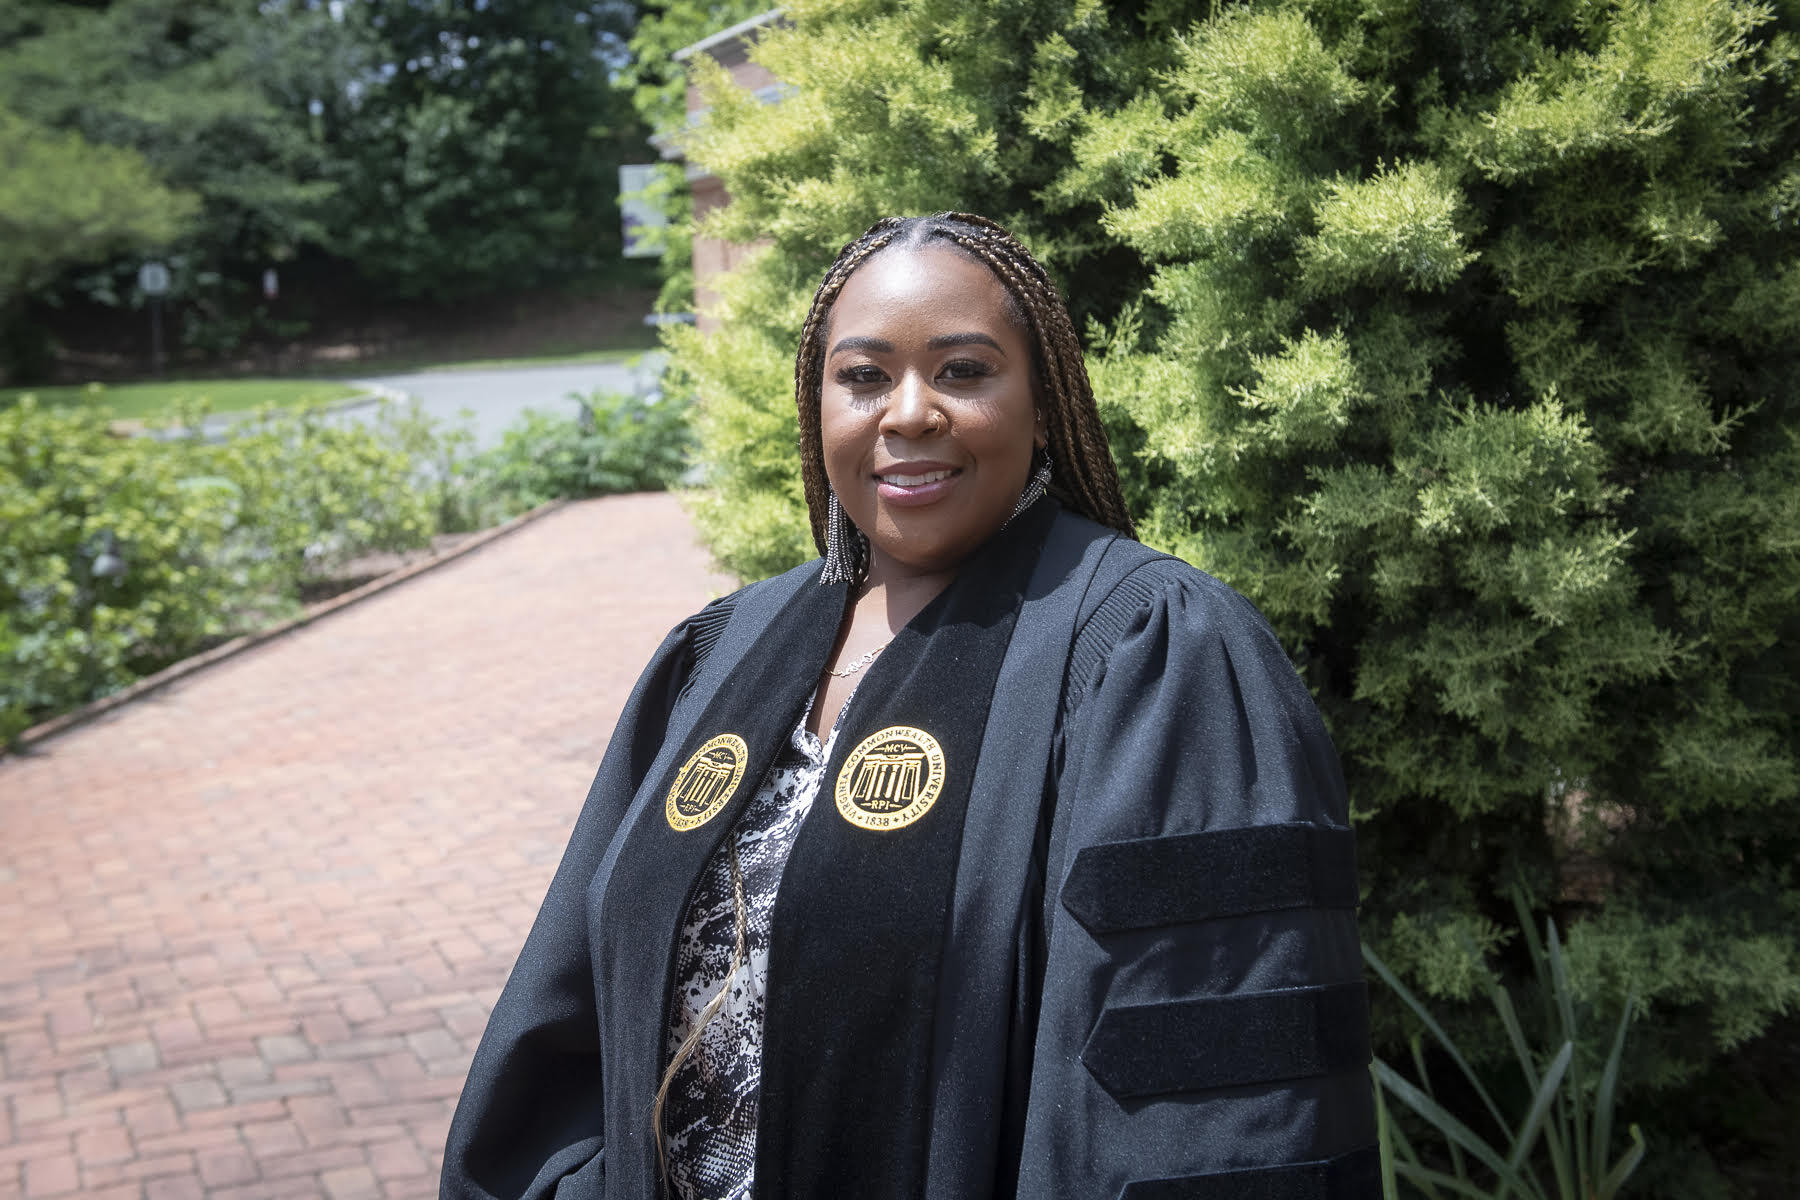 VCU graduate Briona Phillips, standing outside and wearing her graduation robe.